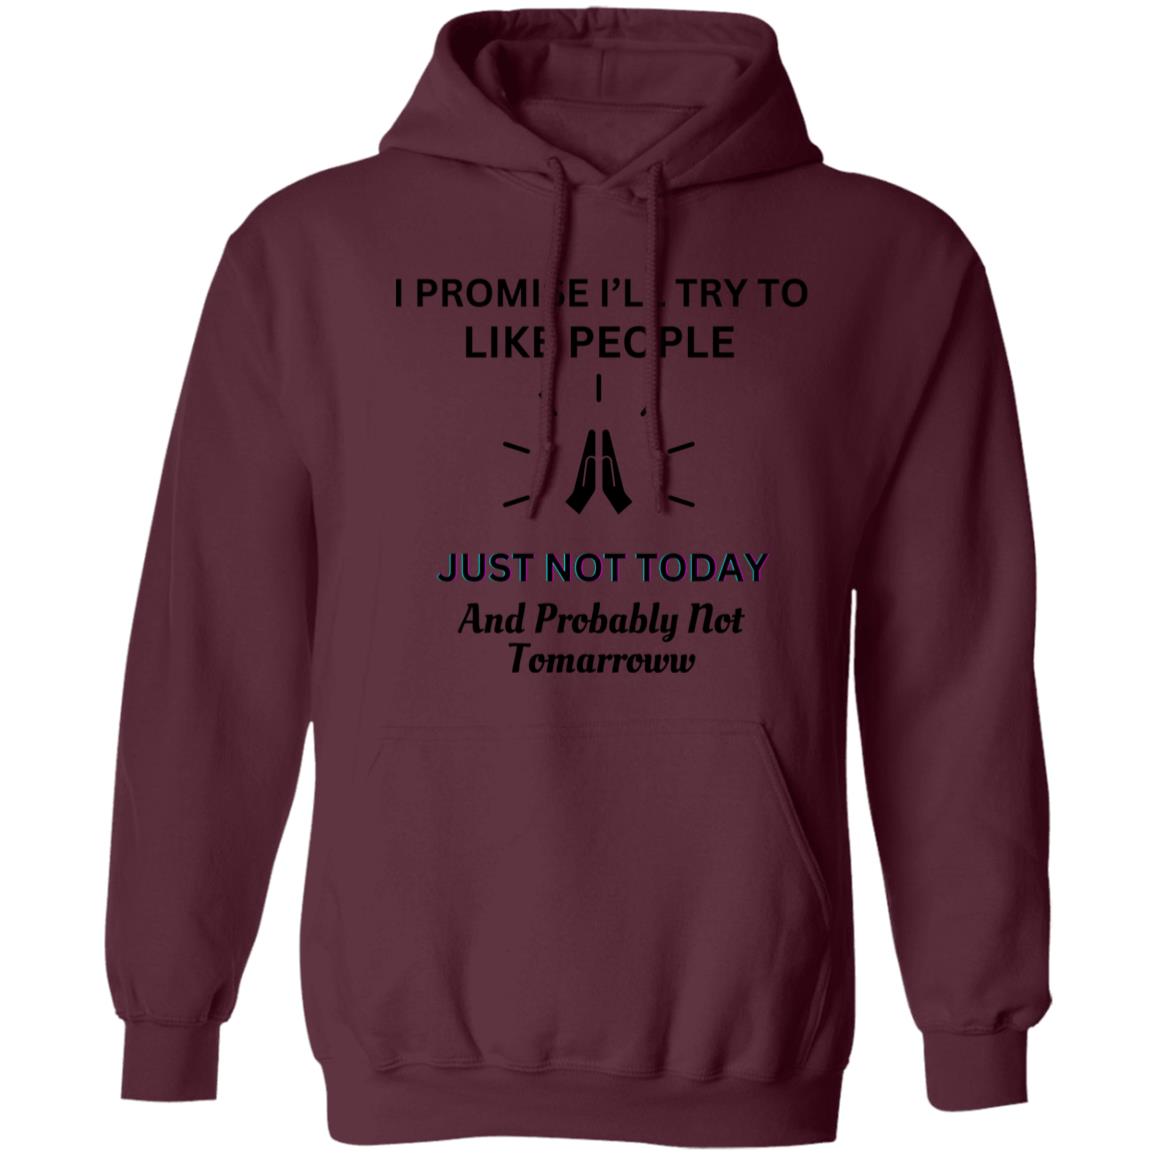 I PROMISE I'LL TRY TO LIKE PEOPLE... (UNISEX) HOODIE